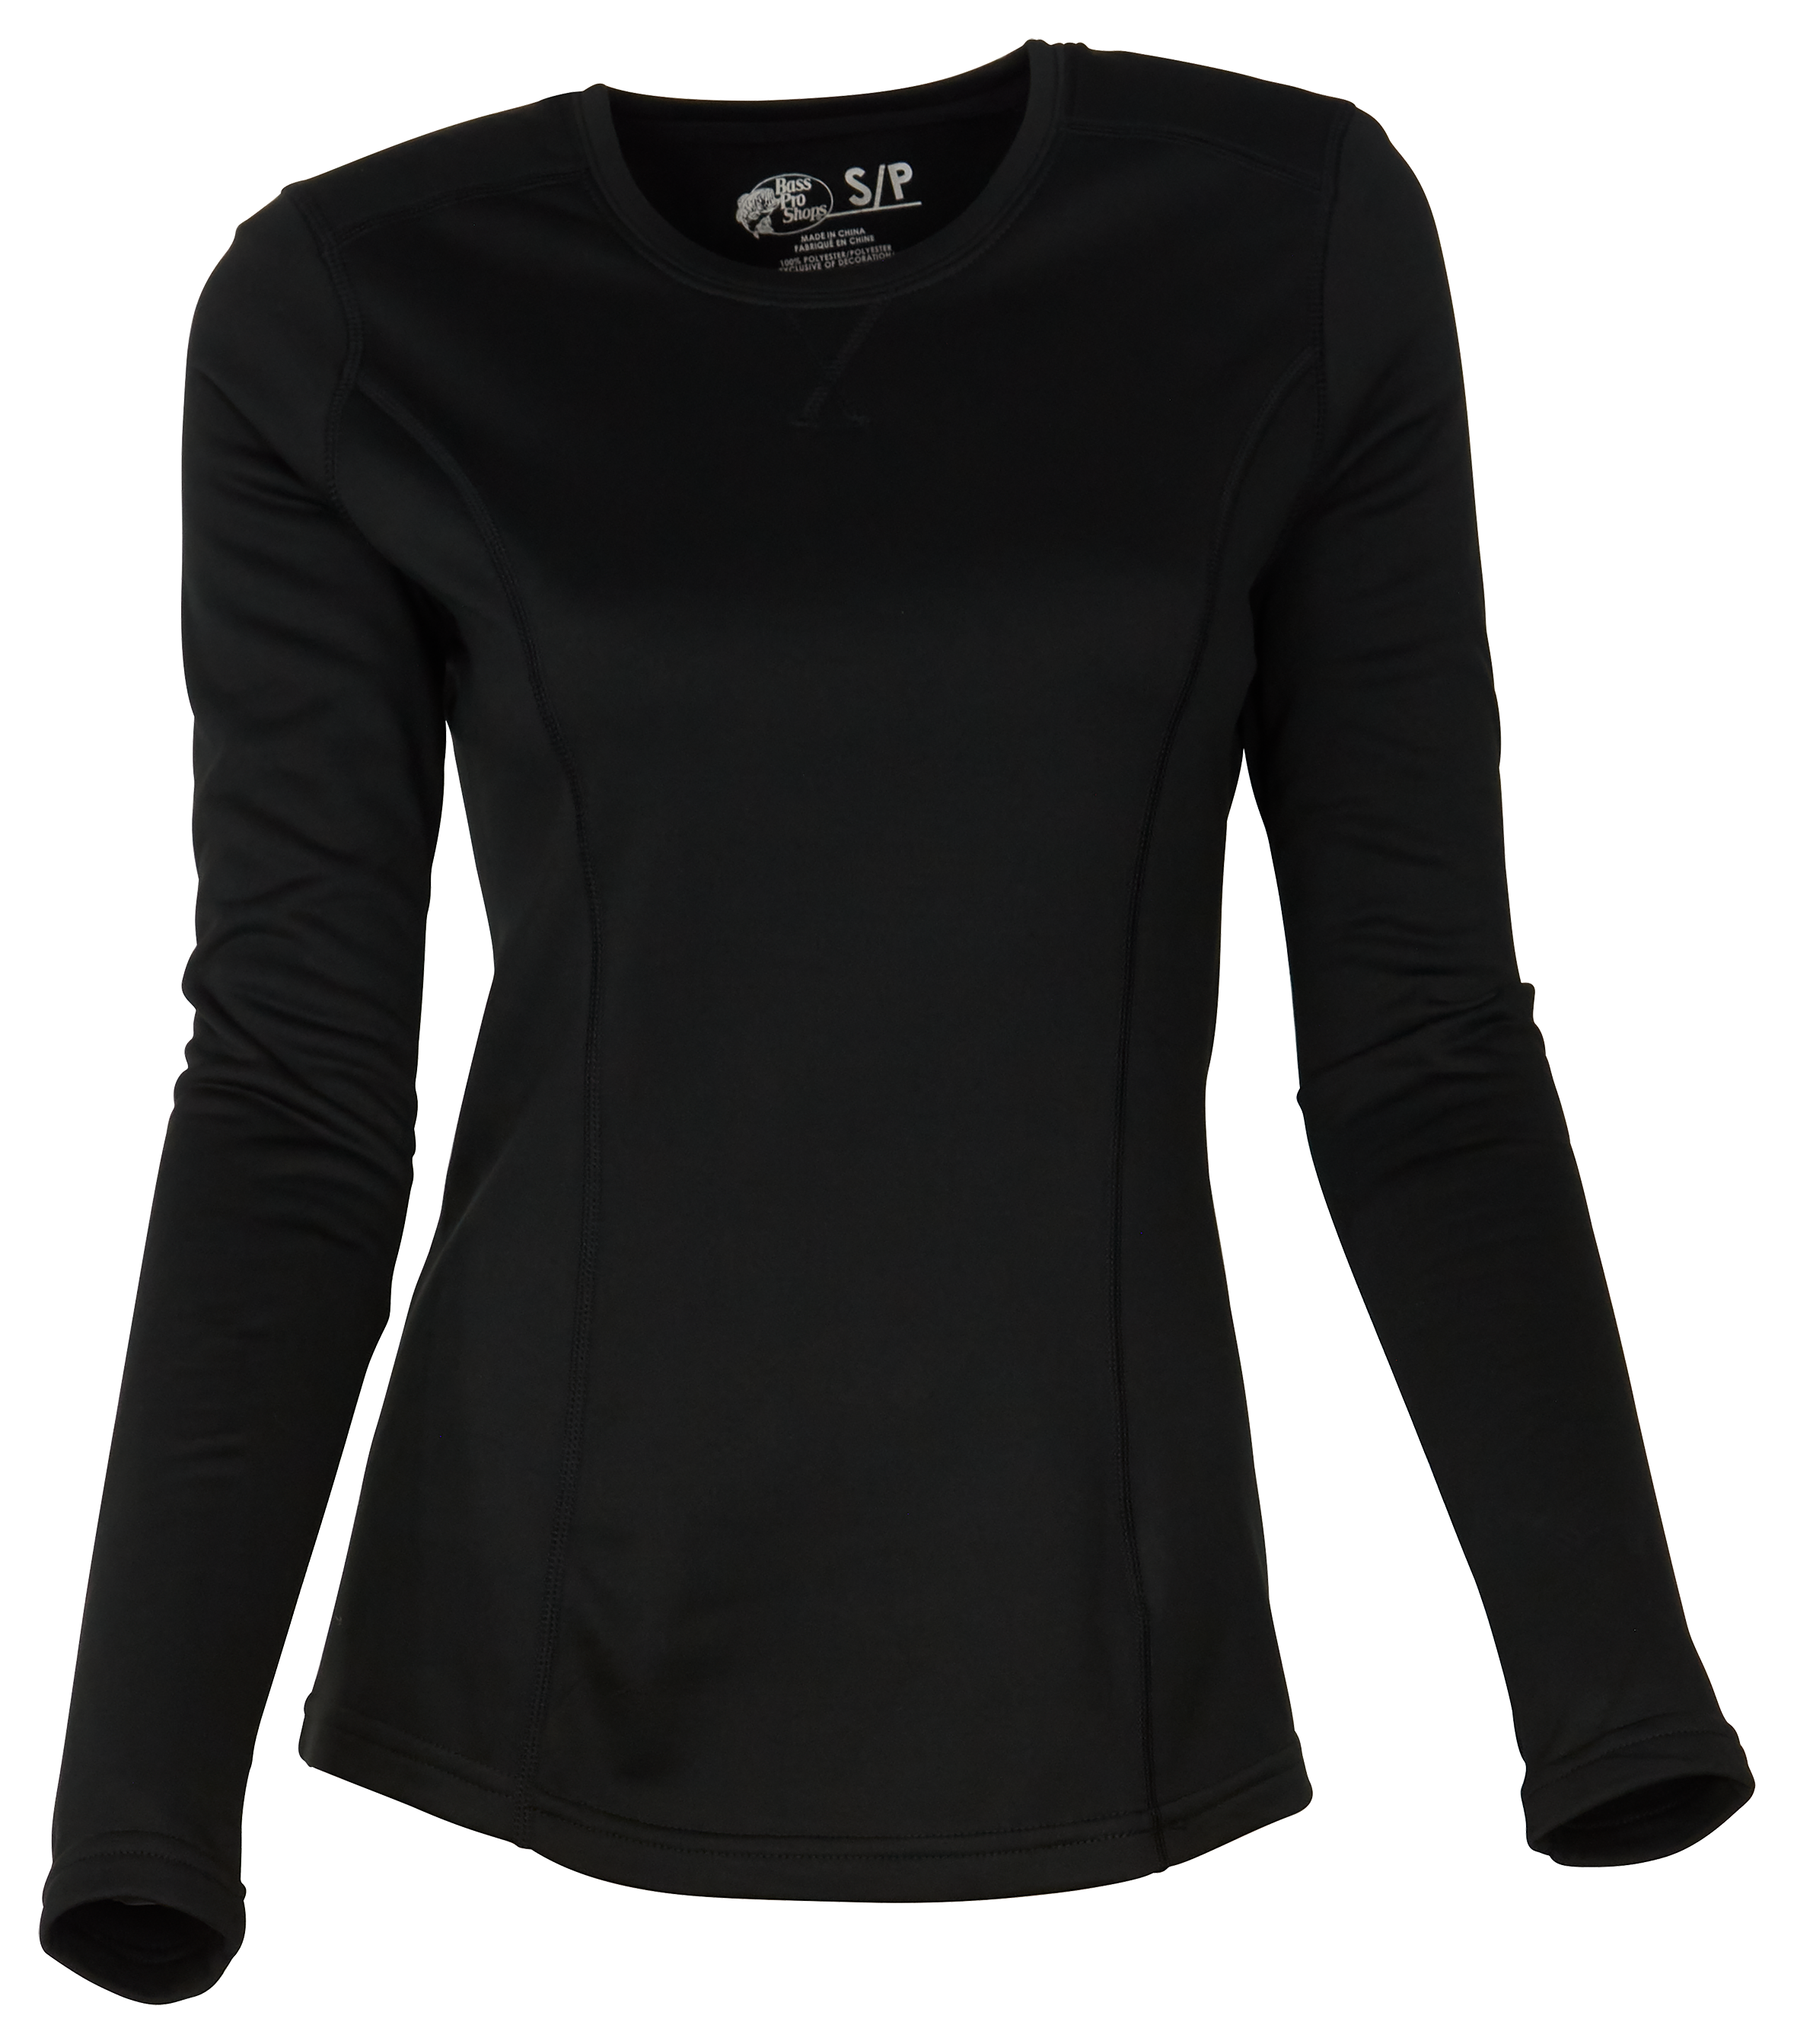 Bass Pro Shops Thermal Fleece Long-Sleeve Crew-Neck Top for Ladies - Black - S